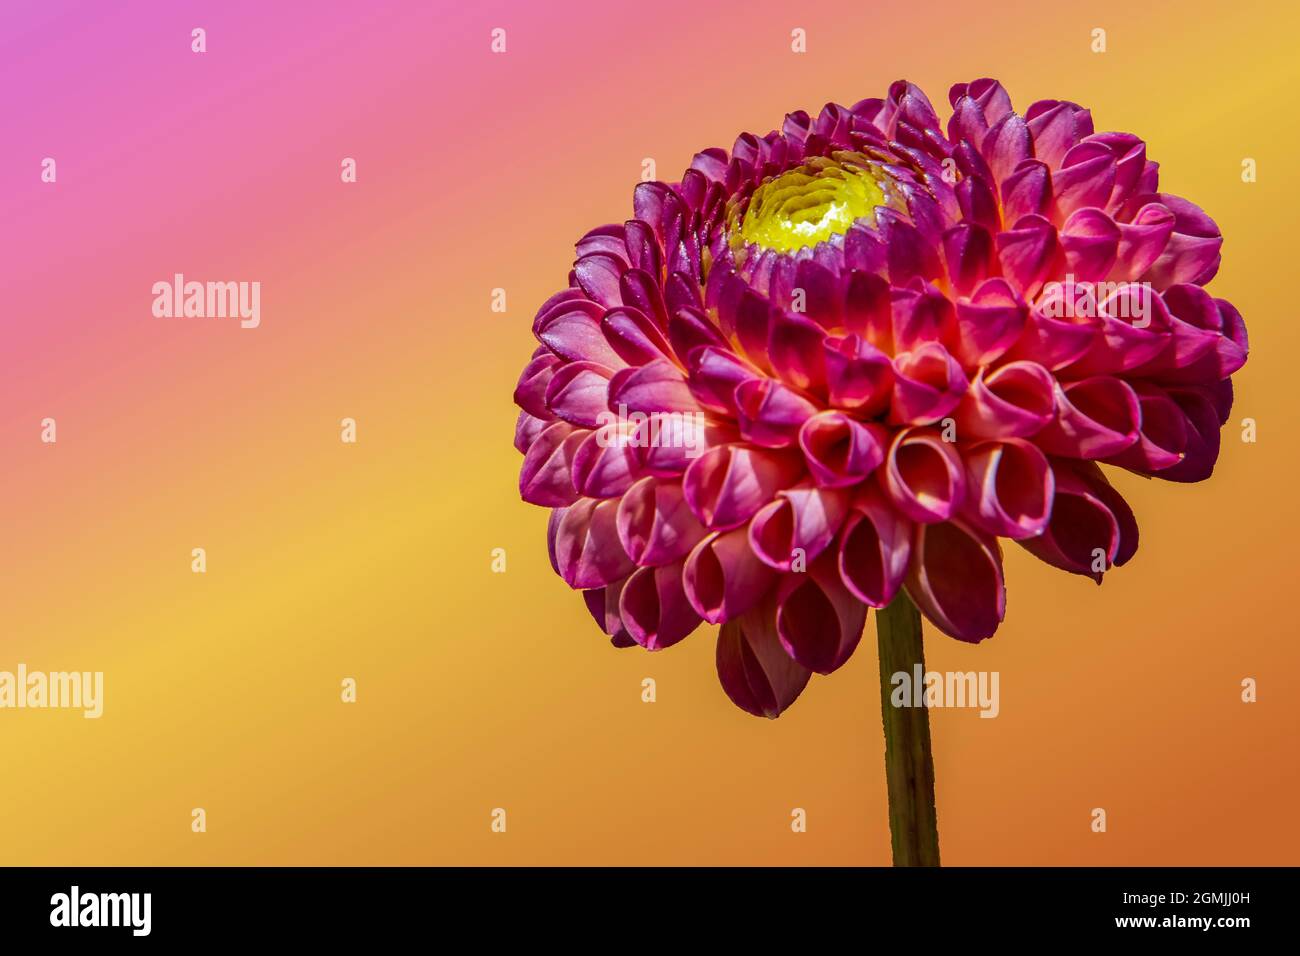 Flower head of a pink dahlia against a multicolor background Stock Photo